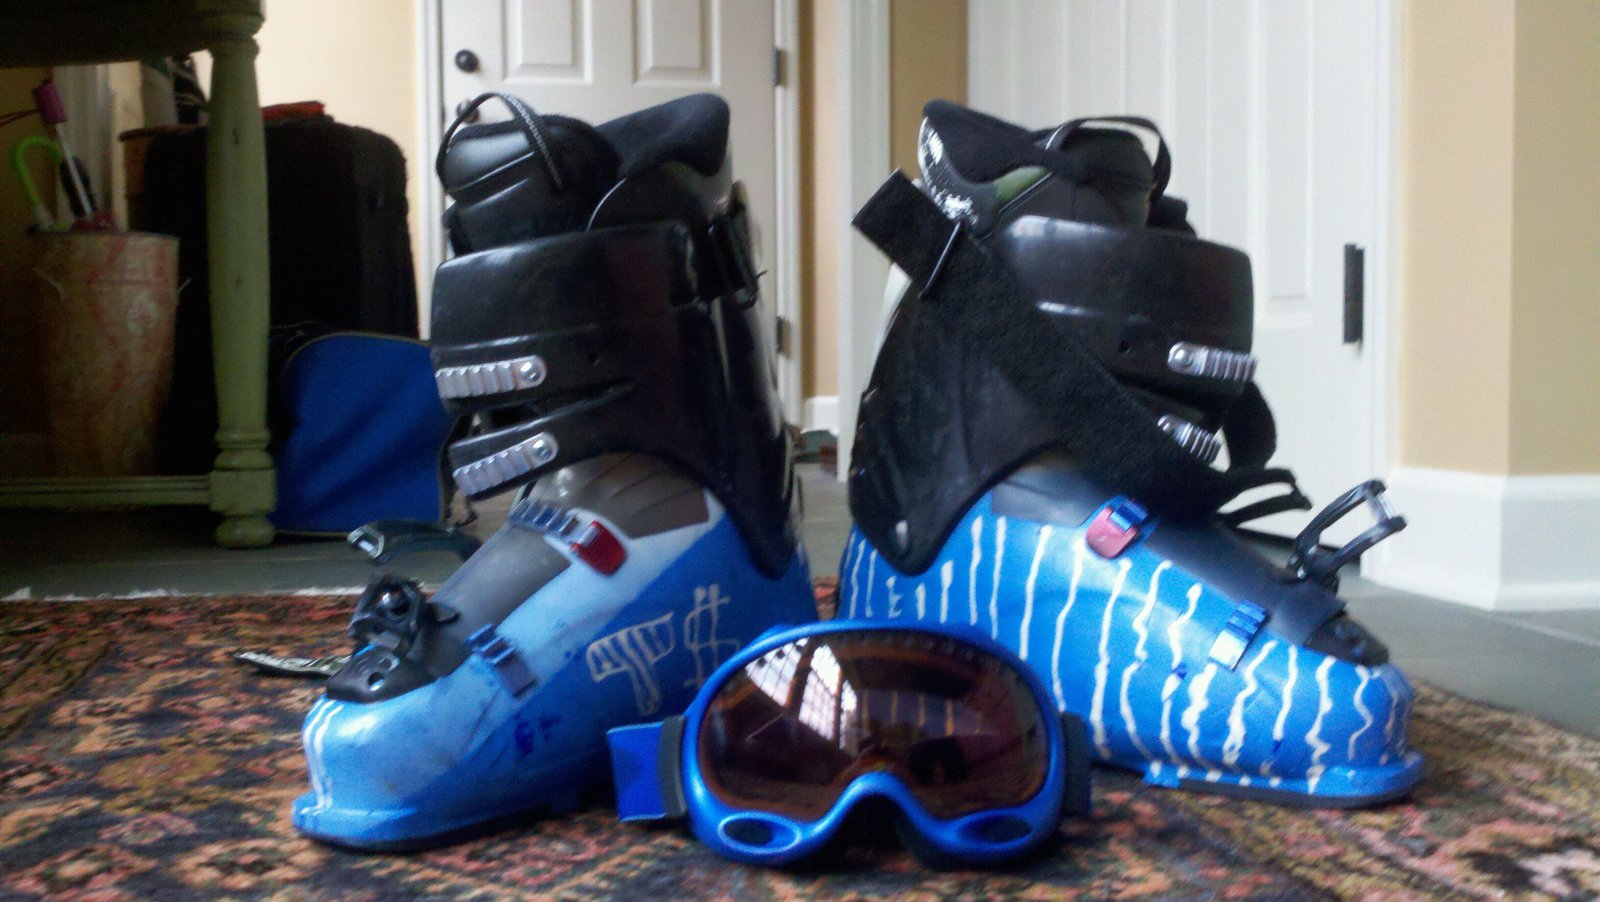 Dyed ski boots and goggles